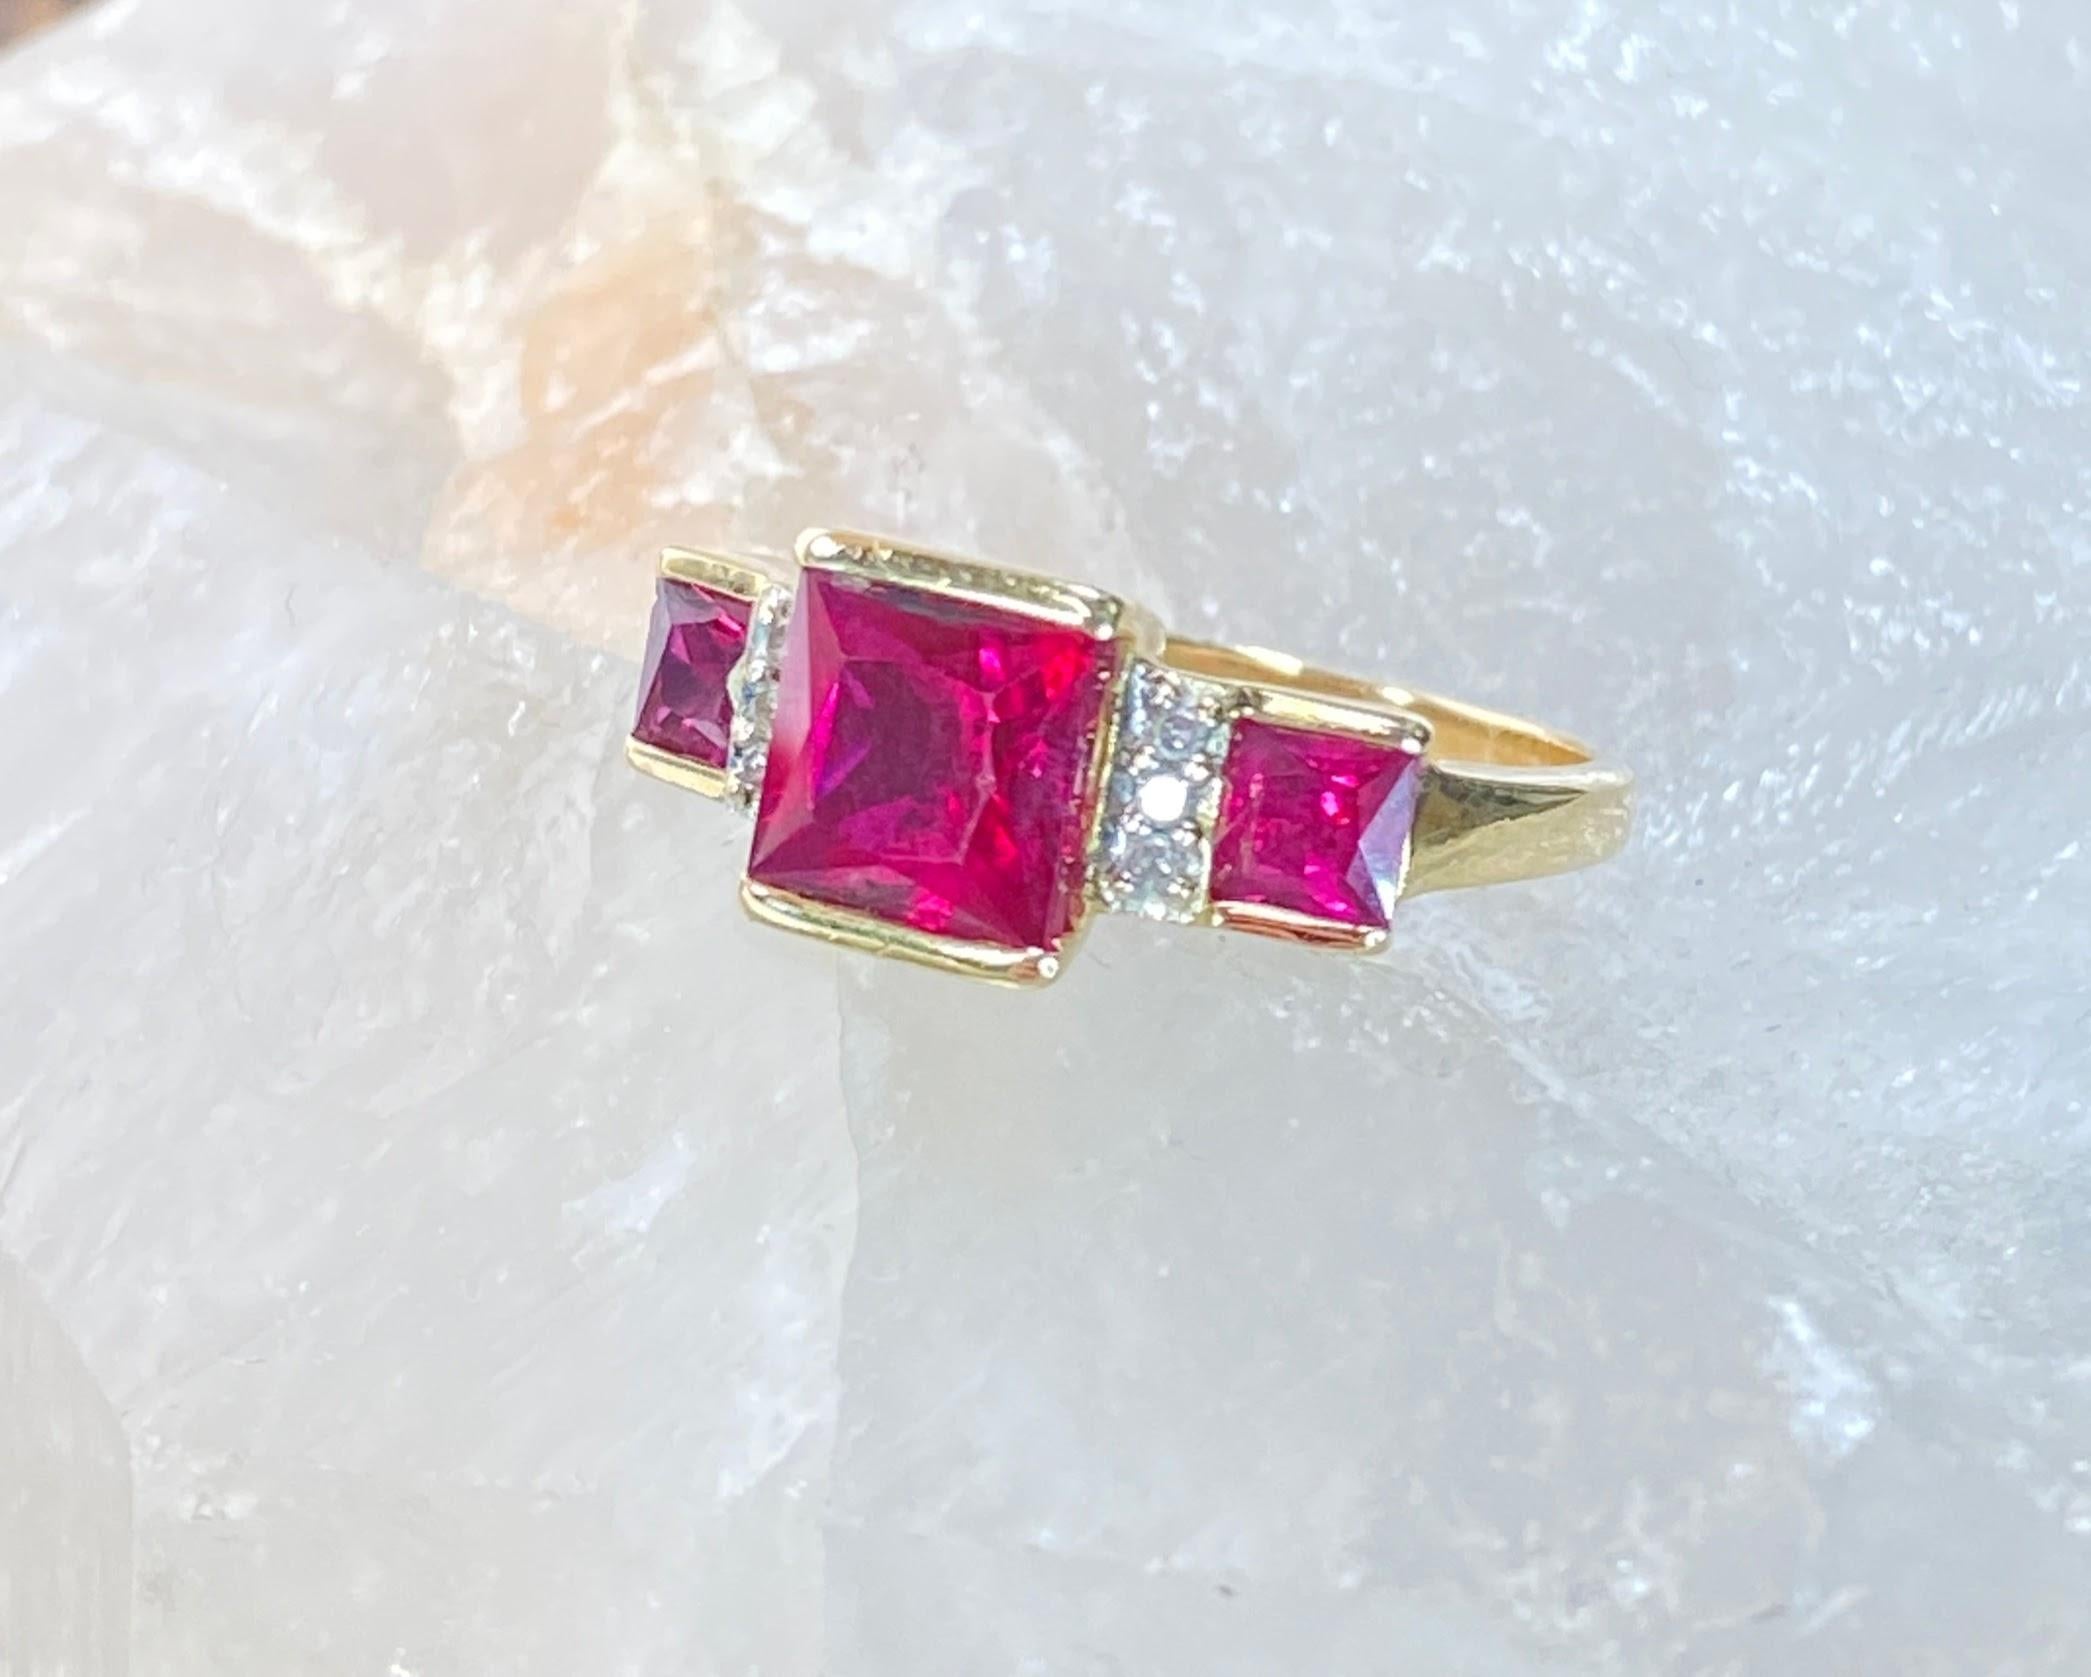 10K Yellow Gold 3 Carat Lab Princess Cut Ruby & Diamond 3 Stone Square Ring

This beautiful ring features 3 princess cut synthetic rubies, nestled in solid 10k yellow gold and accented by natural diamonds. With a total carat weight of 3.04 (by